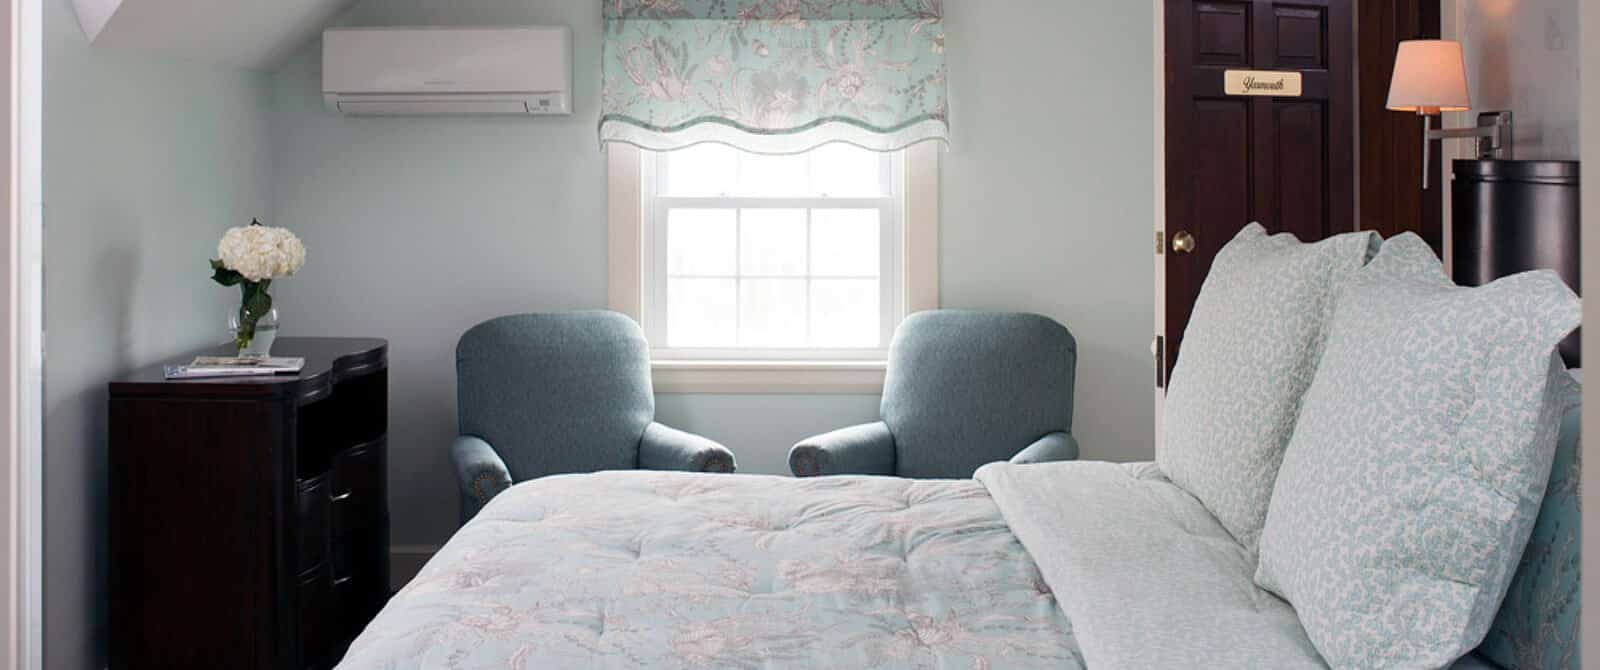 Bedroom with bed, dresser and two sitting chairs below a single bright window